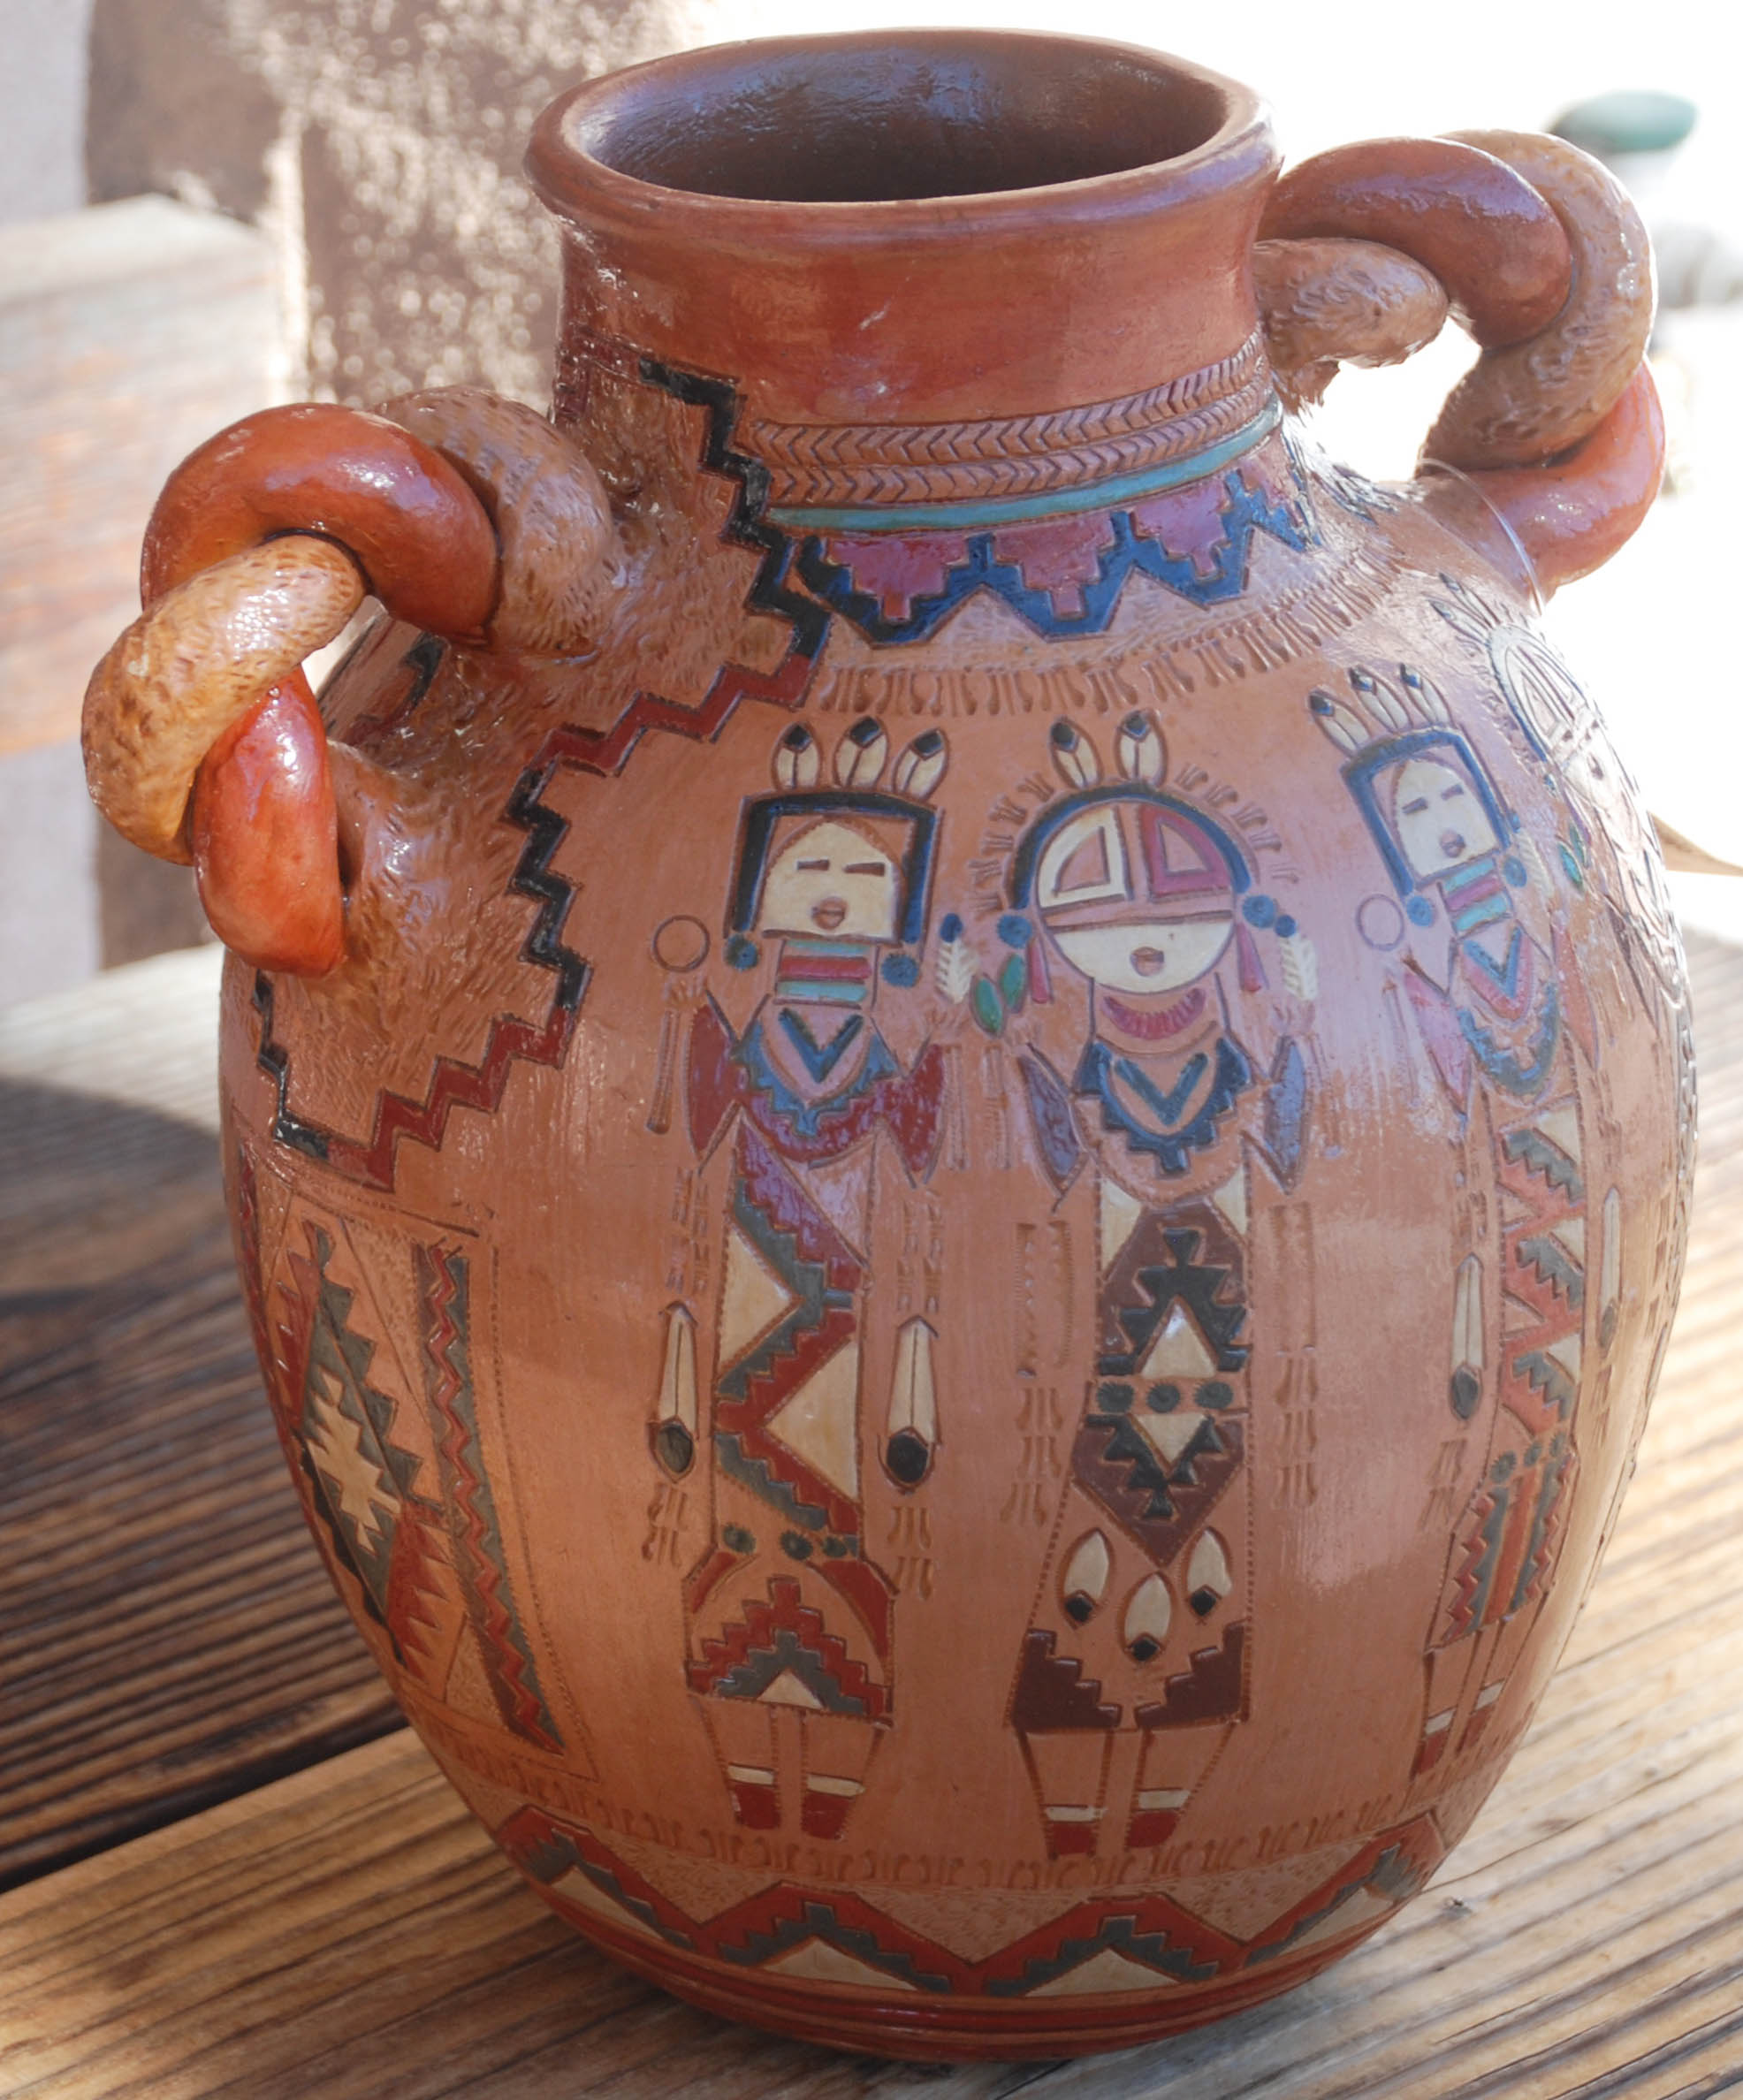 Ken and Irene White | Navajo Jug | Penfield Gallery of Indian Arts | Albuquerque, New Mexico